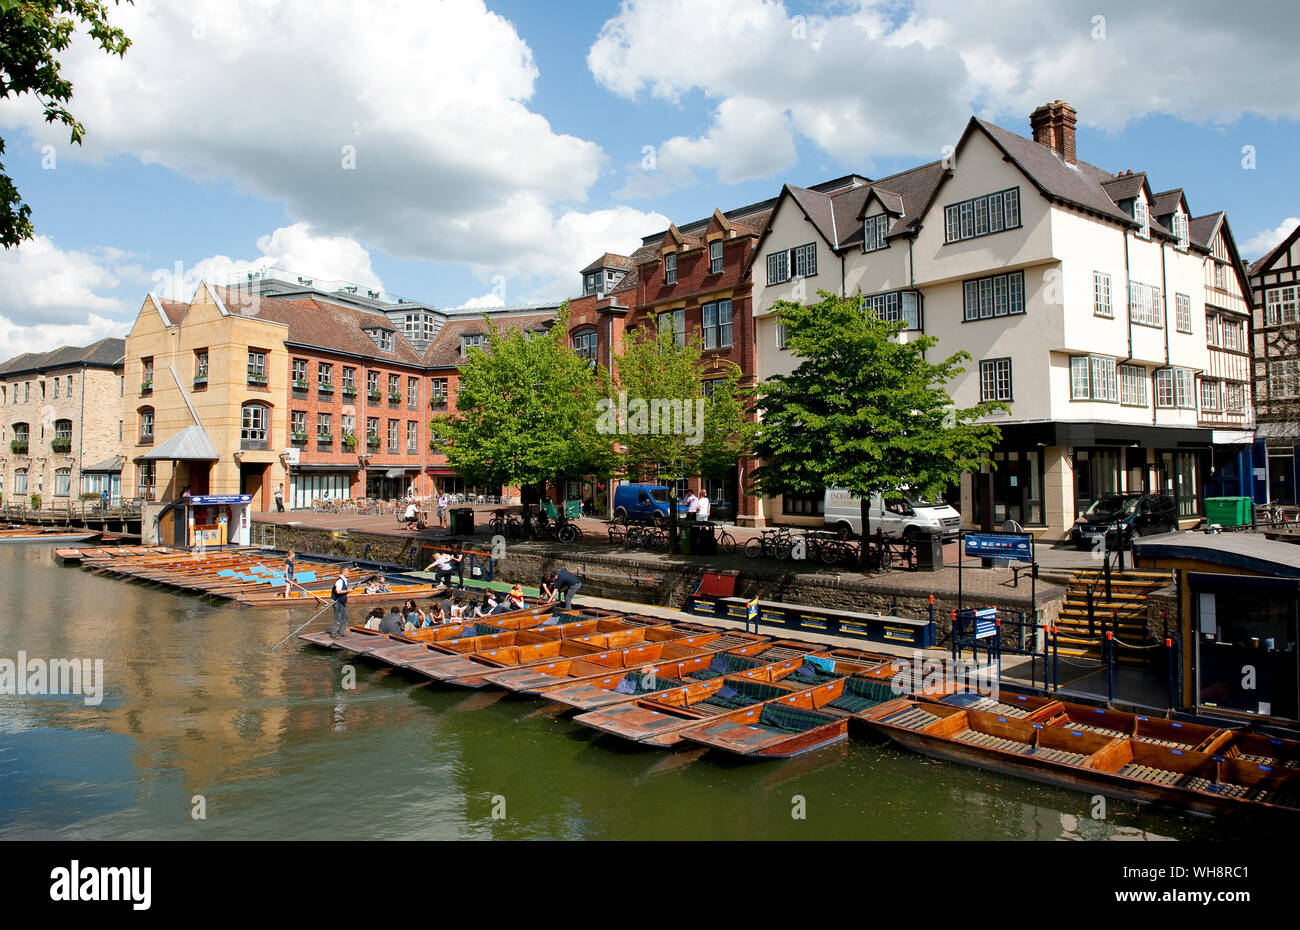 Wooden punts on the River Cam at Scudamore's Punting Company, Cambridge, England. Stock Photo